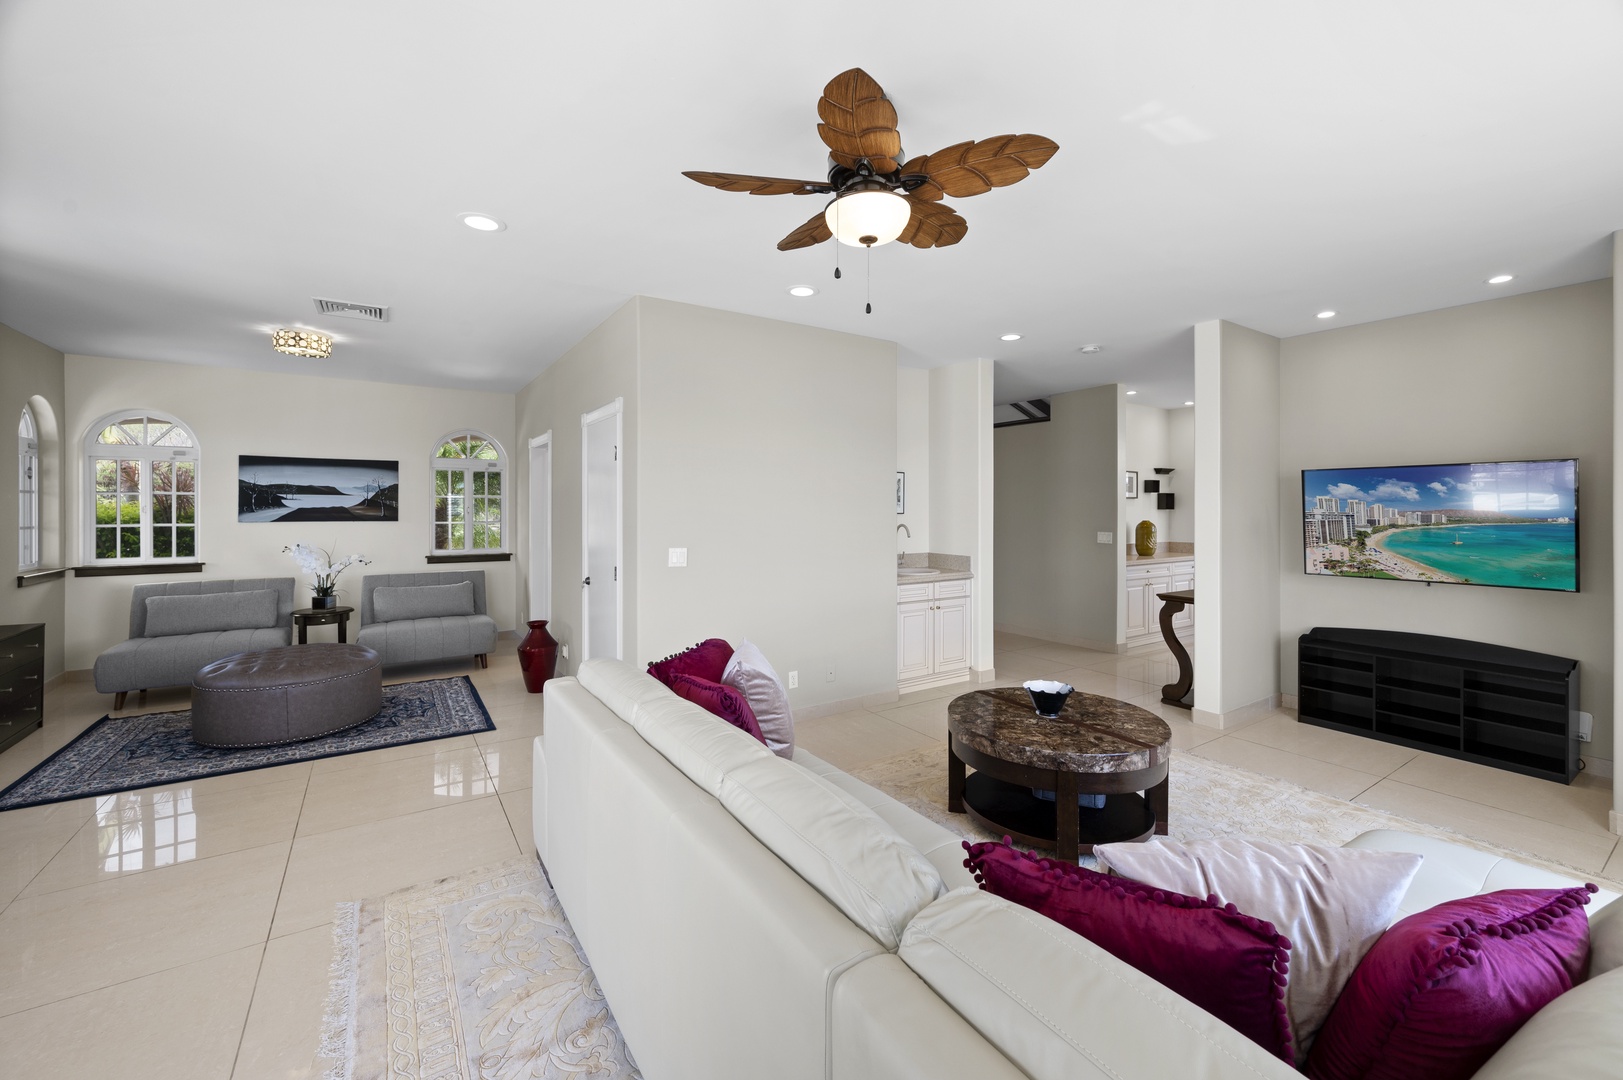 Honolulu Vacation Rentals, Lotus on a Hill* - This open-concept living space is aptly fit for entertaining